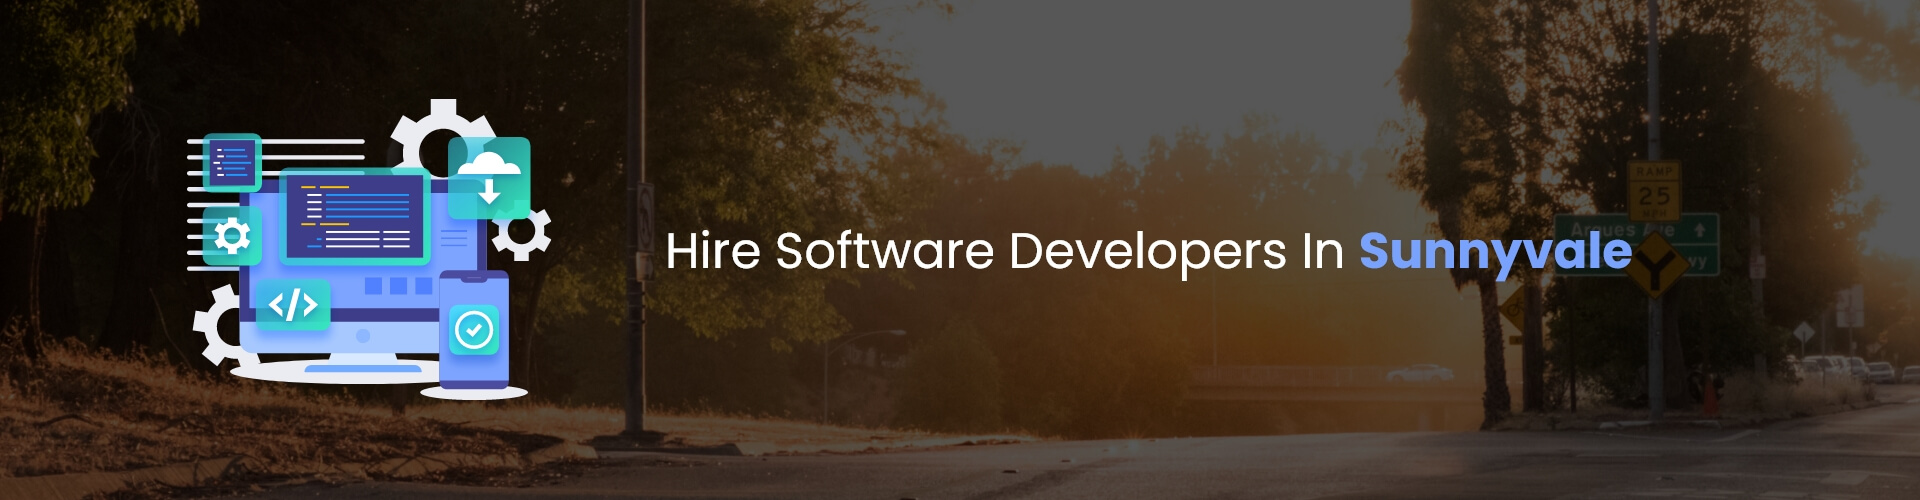 hire software developers in sunnyvale